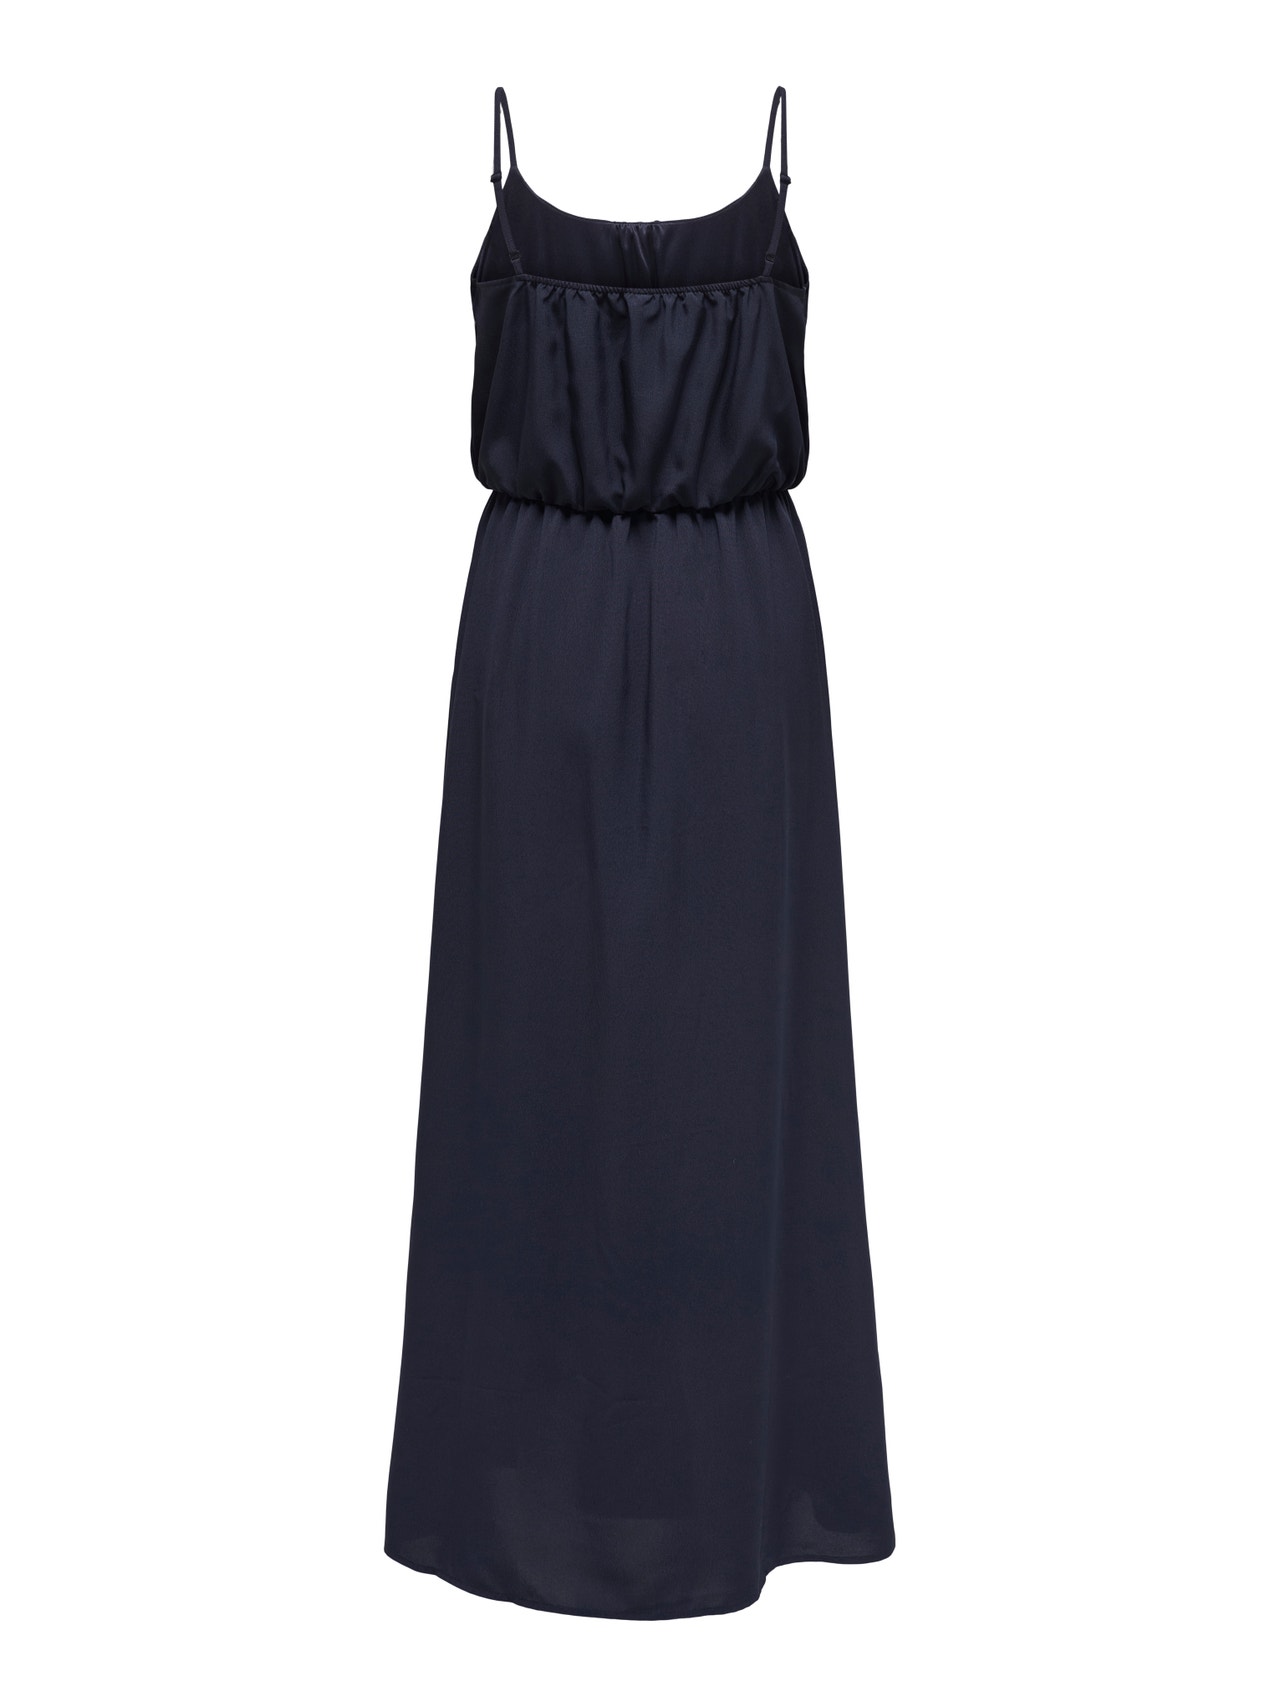 ONLY maxi dress with shoulder straps -Night Sky - 15335556